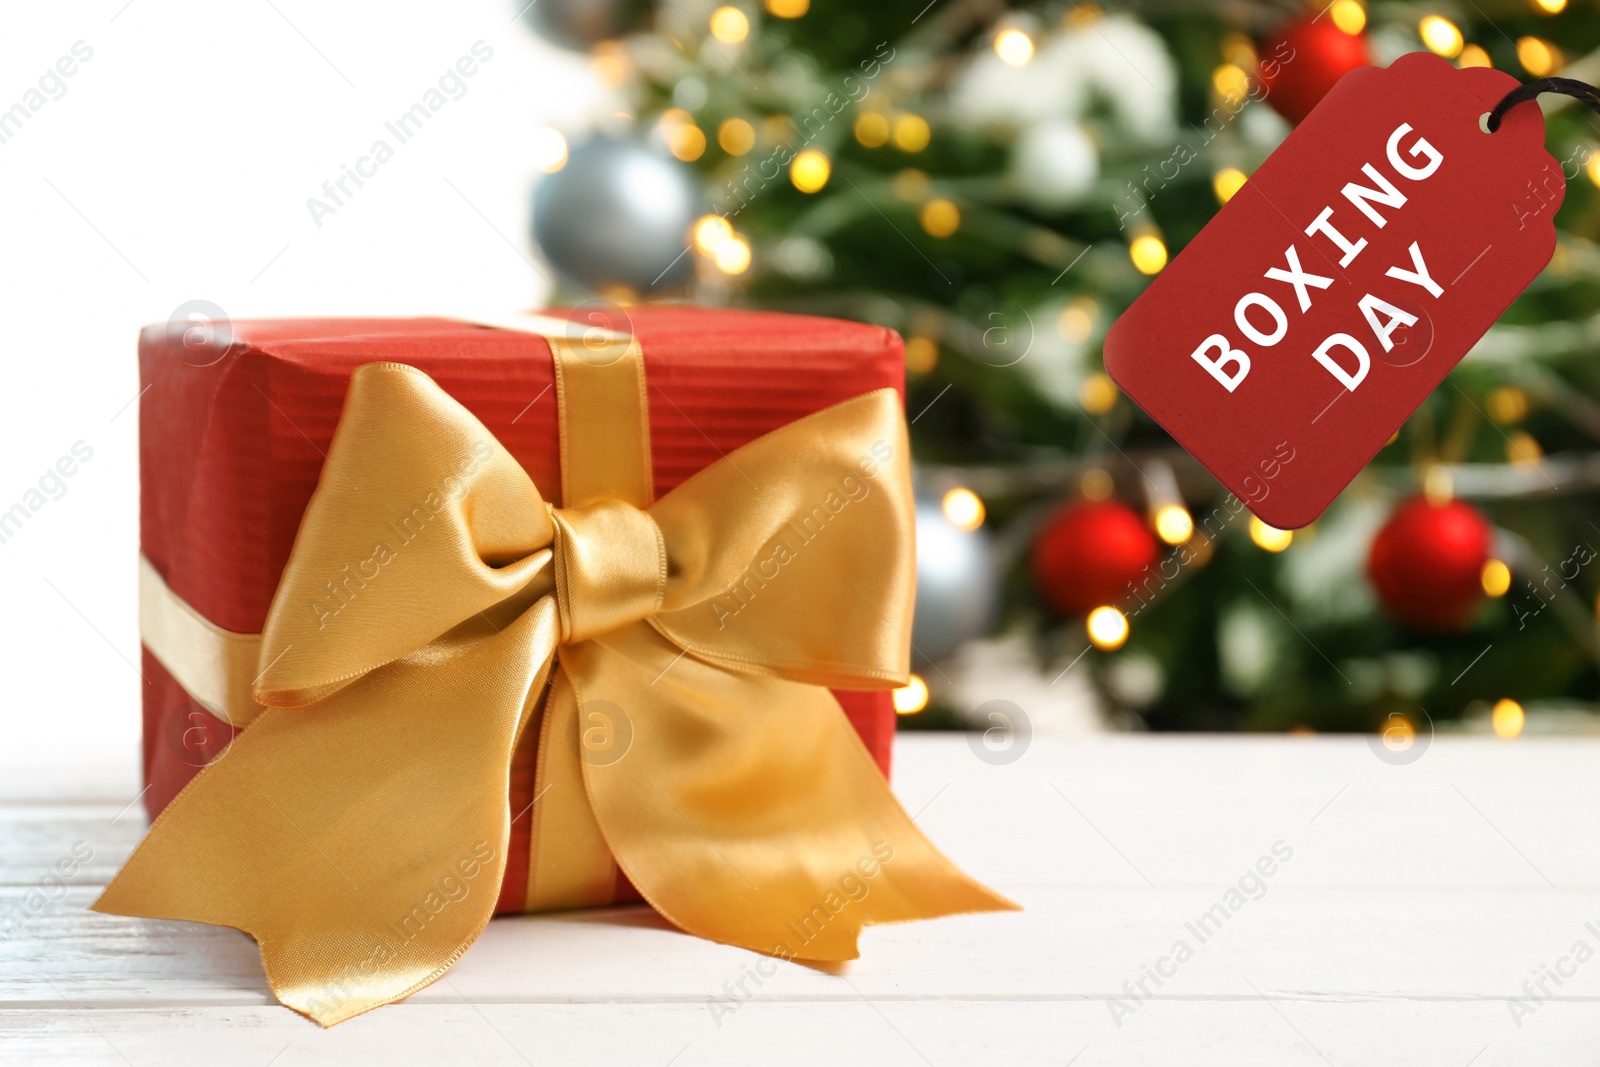 Image of Gift and tag with text Boxing Day against Christmas tree